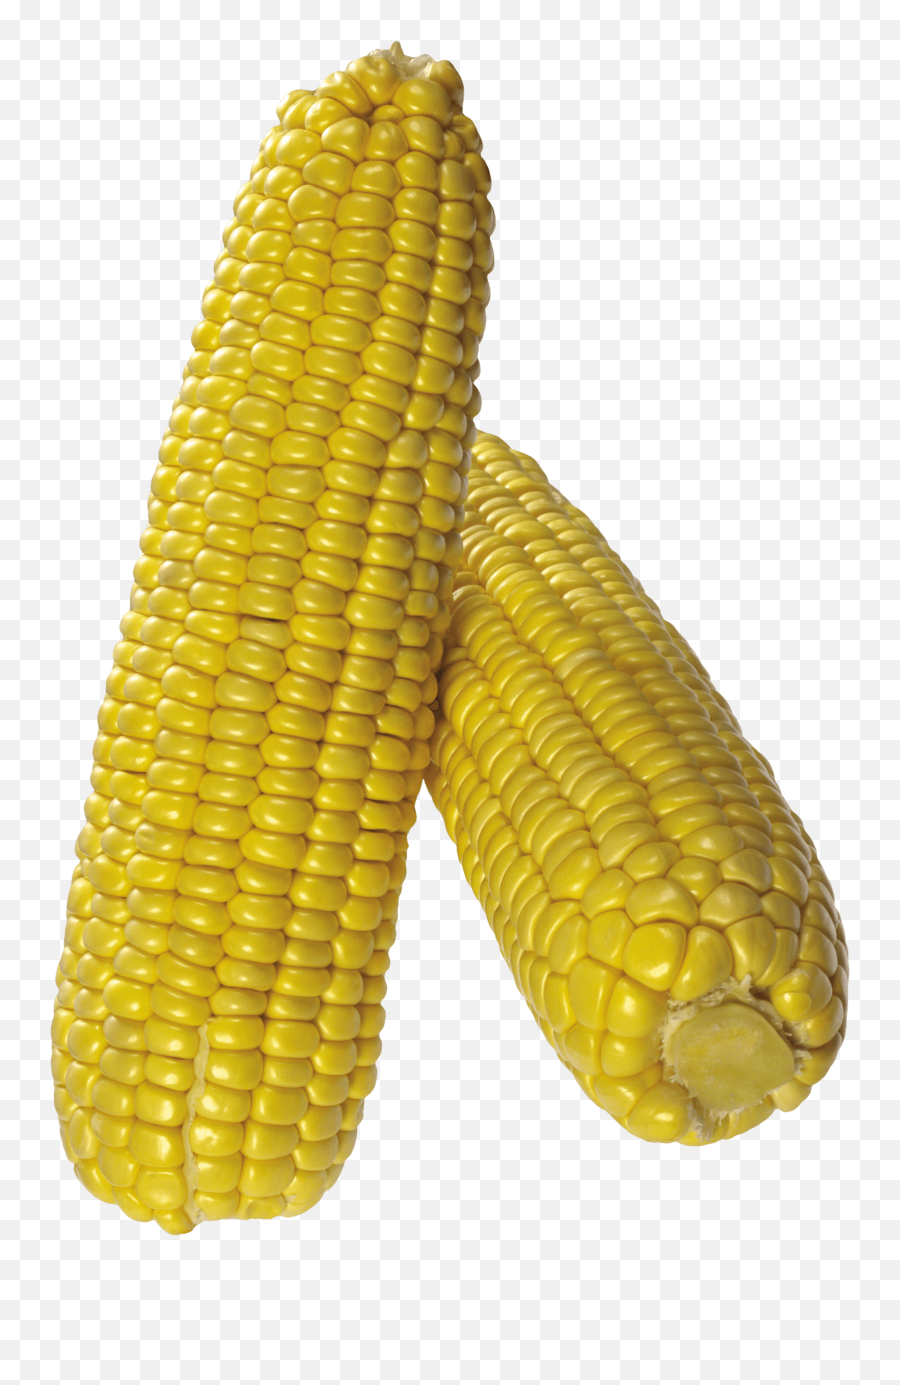 Download Corn Png Image Hq - Cartoon Corn With Background,Corn Cob Png -  free transparent png images 